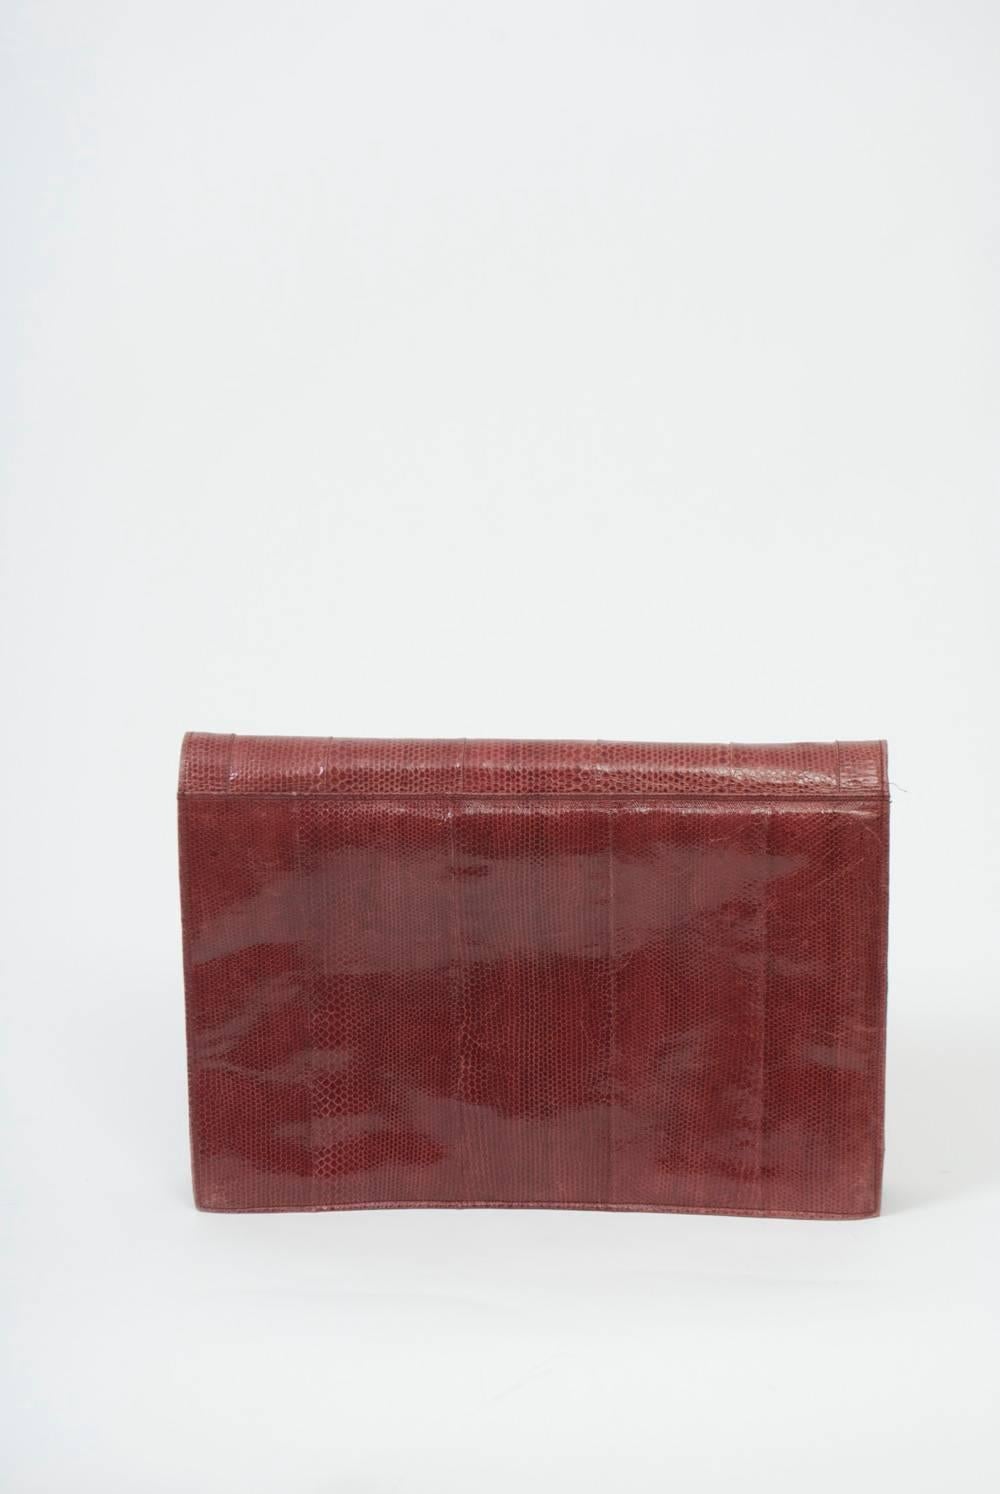 Large envelope clutch in rose snakeskin that opens to reveal two pockets with snaps closures and a gray suede interior with three sections and two zippered compartments on the reverse of the envelope flap. Roomy for work or personal use.